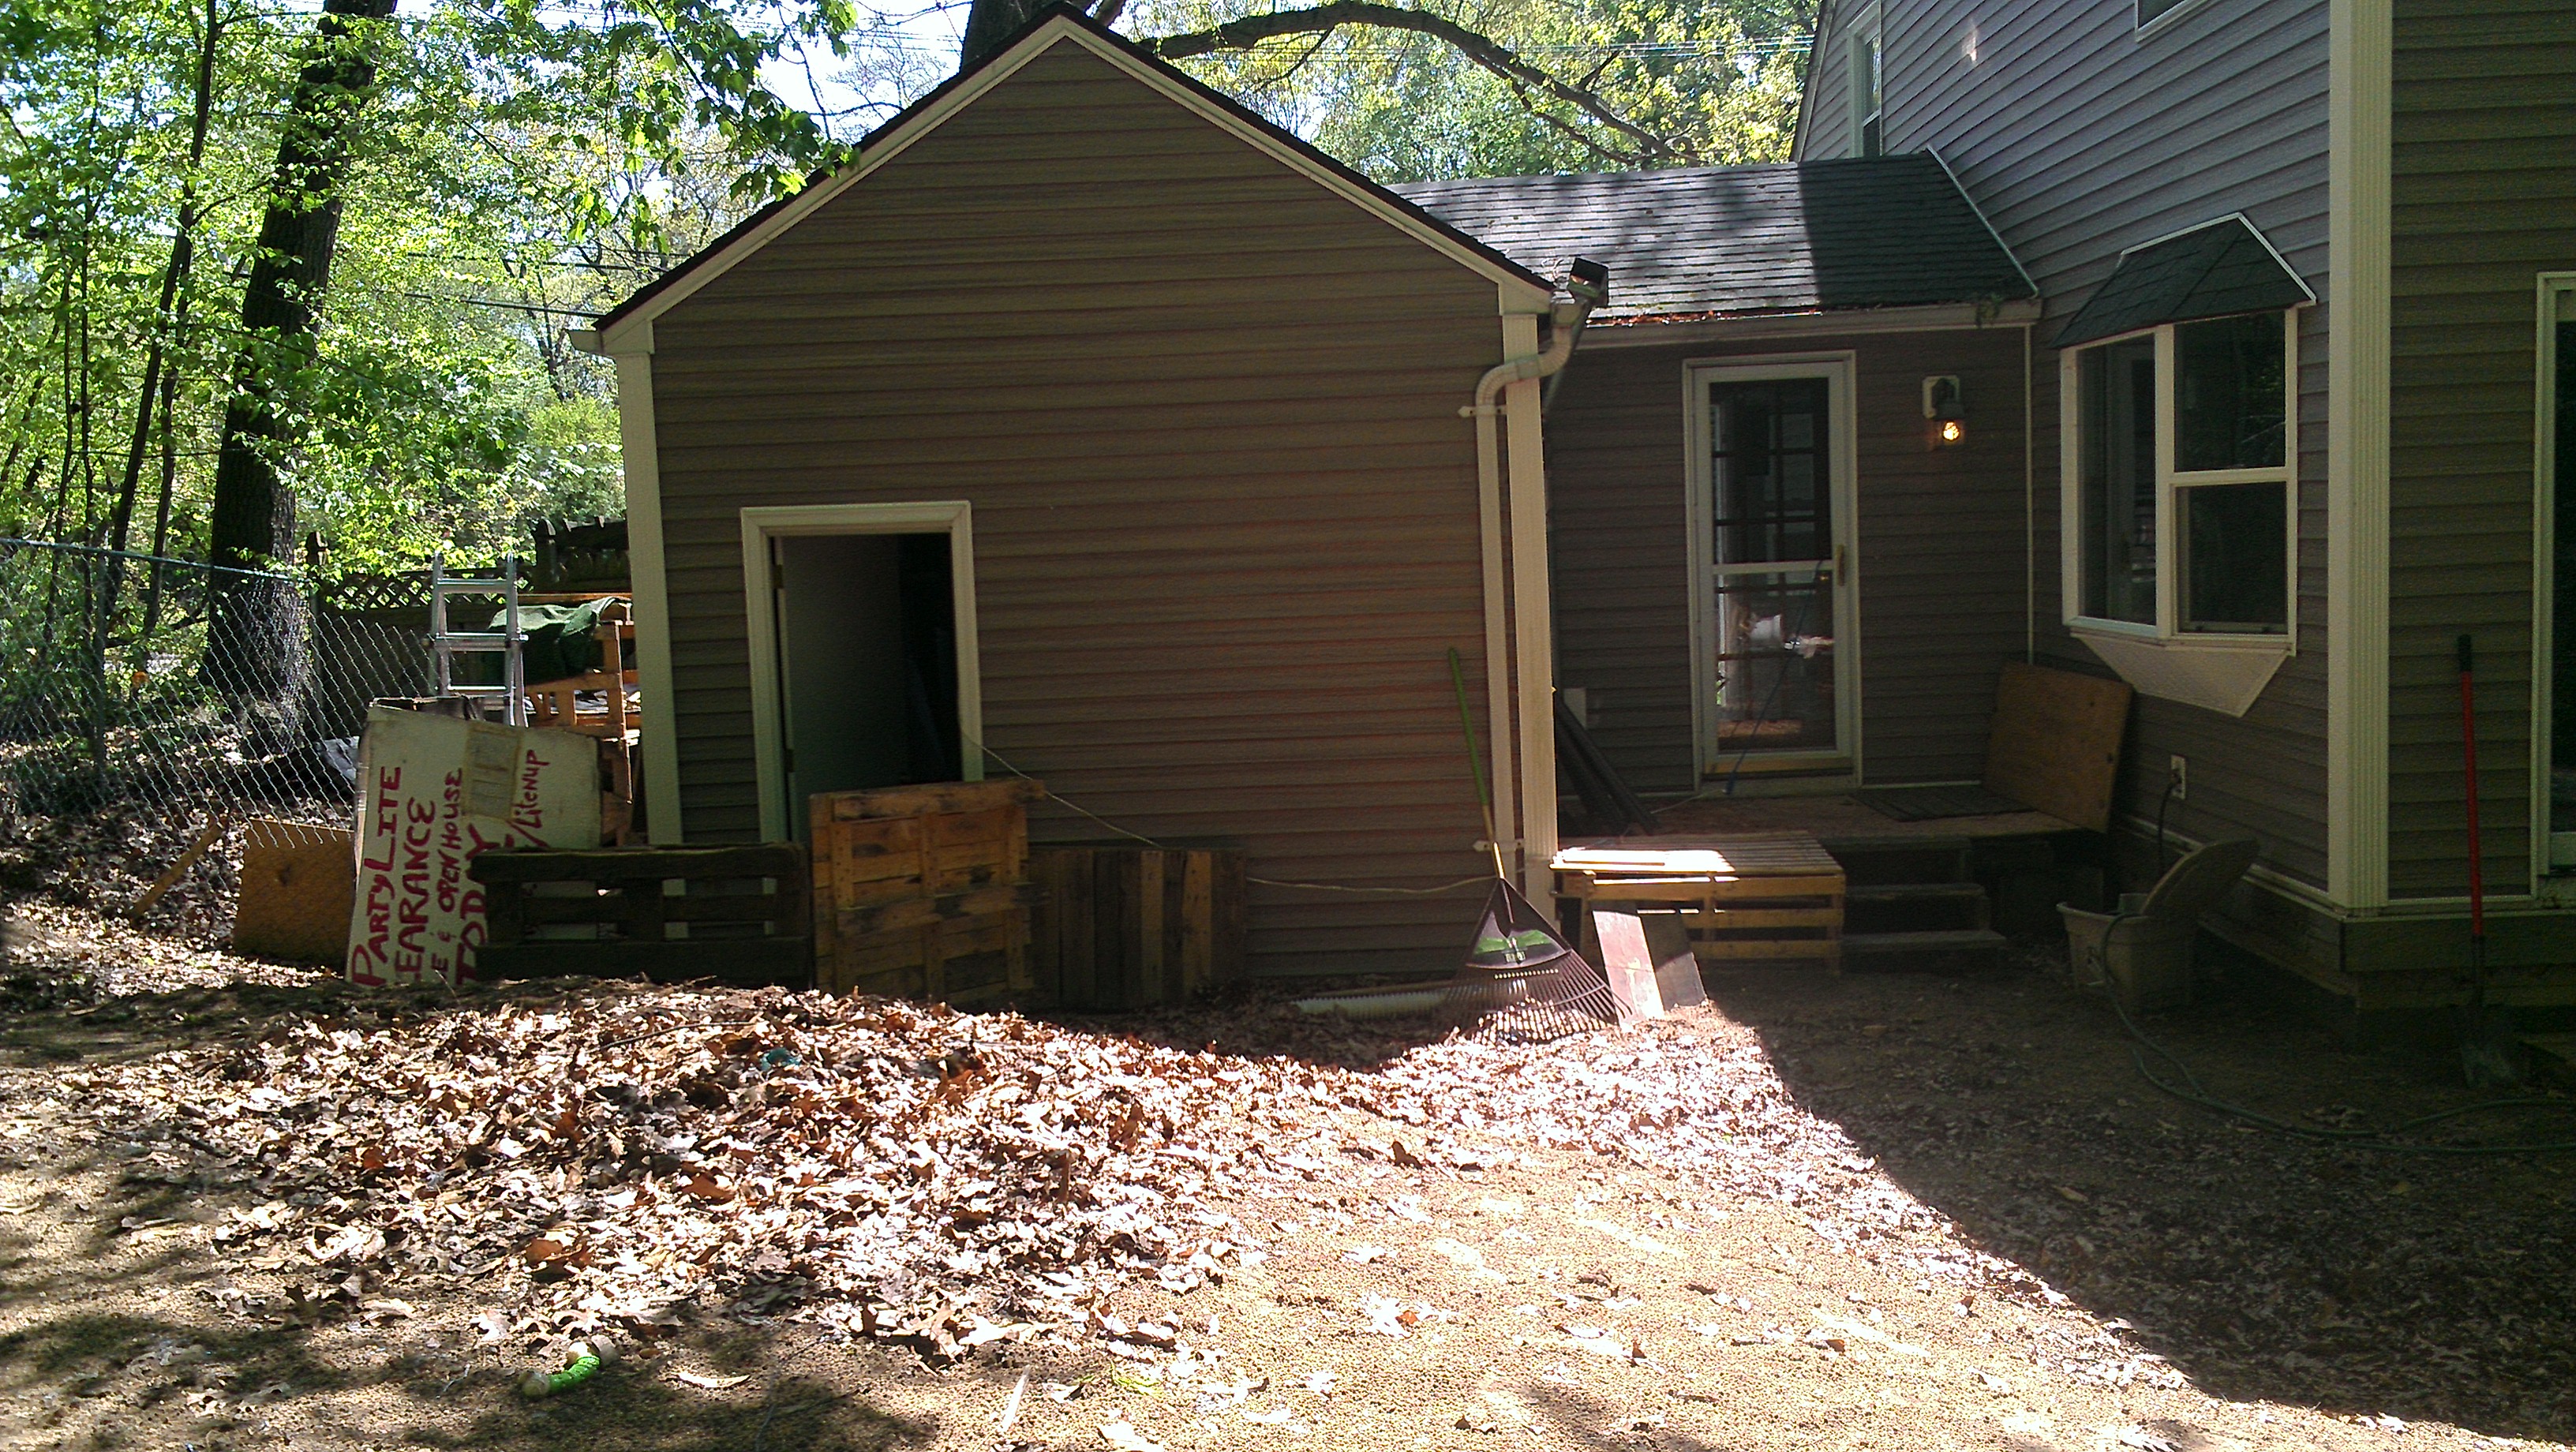 cubby (7x9) next to garage (12x9+), next to fenced outdoor area